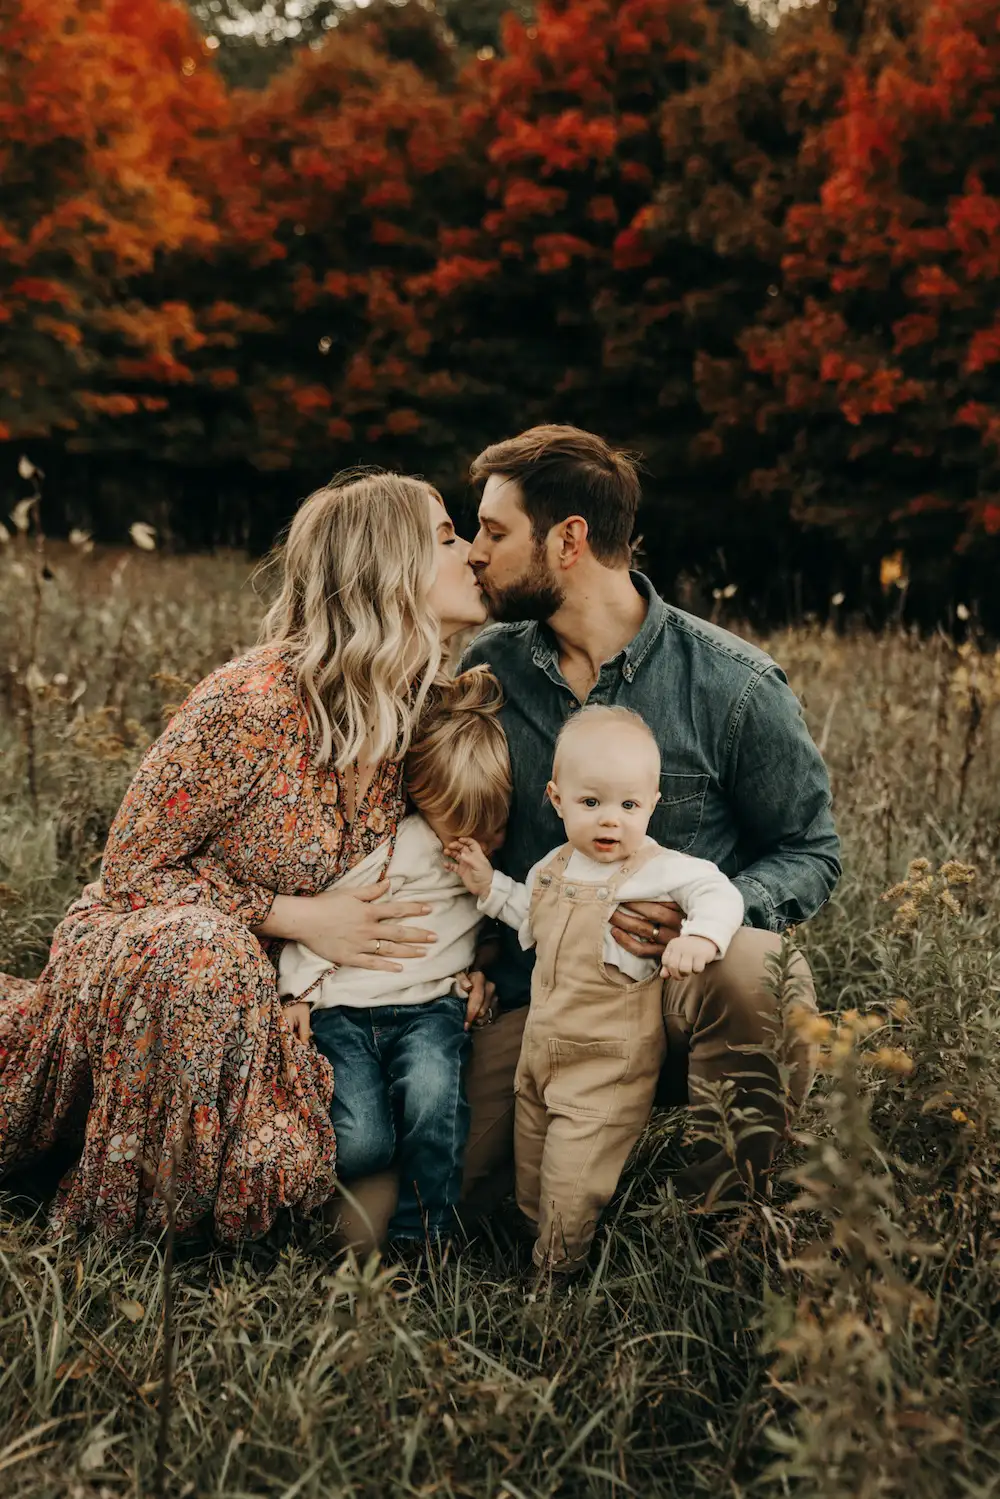 10 Stunning Outdoor Fall Family Photo Outfits to Make Your Photoshoots Unforgettable